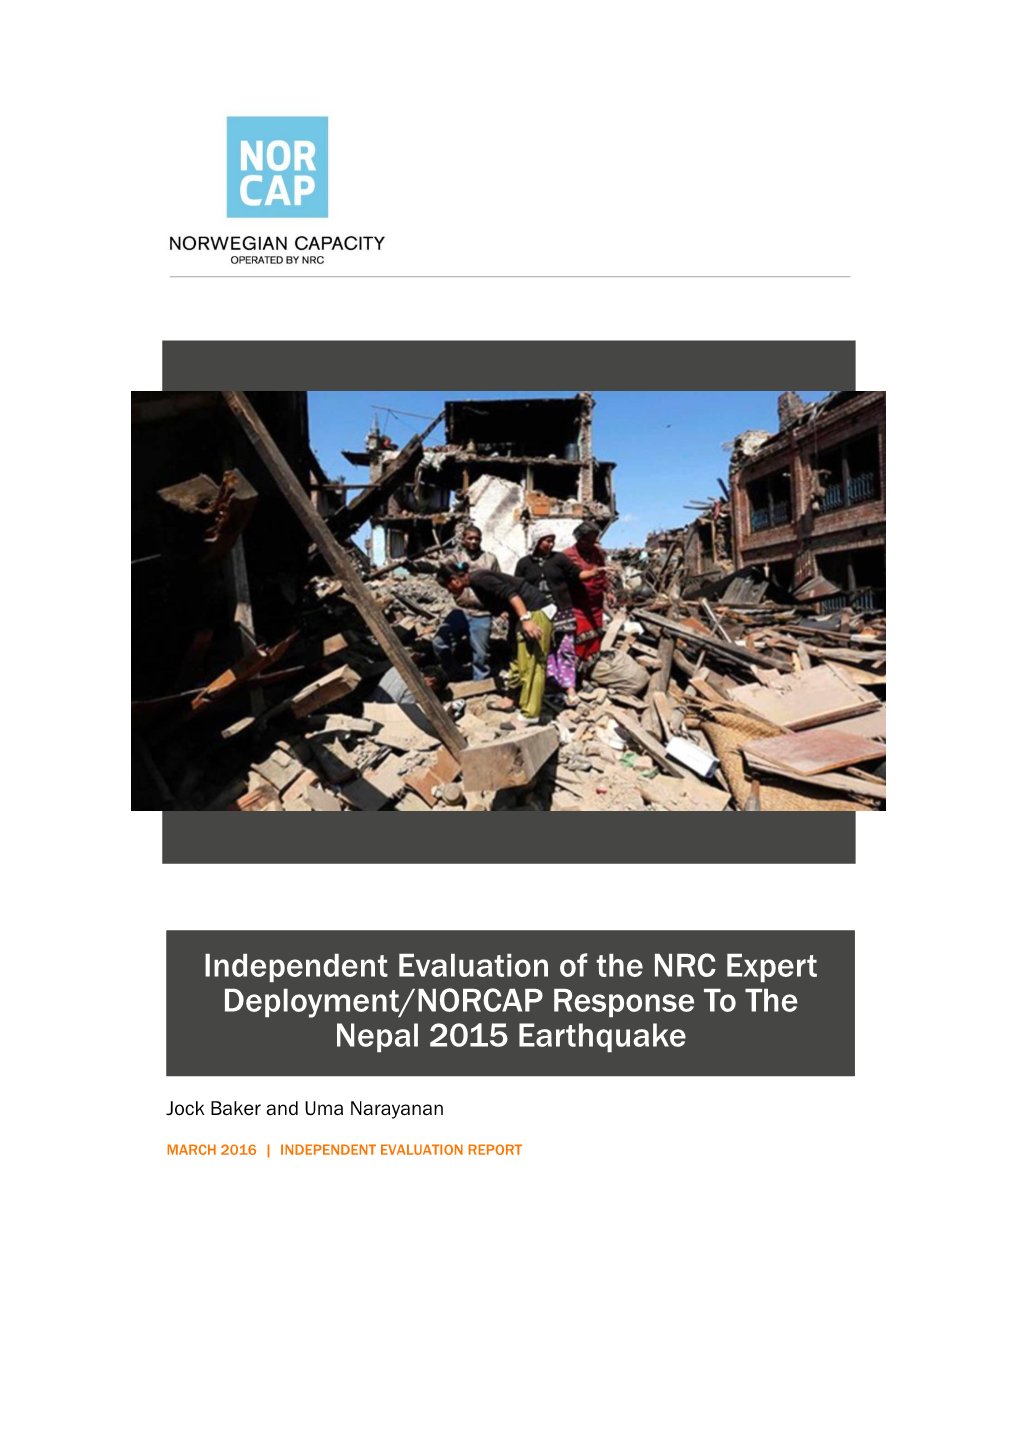 Independent Evaluation of the NRC Expert Deployment/NORCAP Response to the Nepal 2015 Earthquake